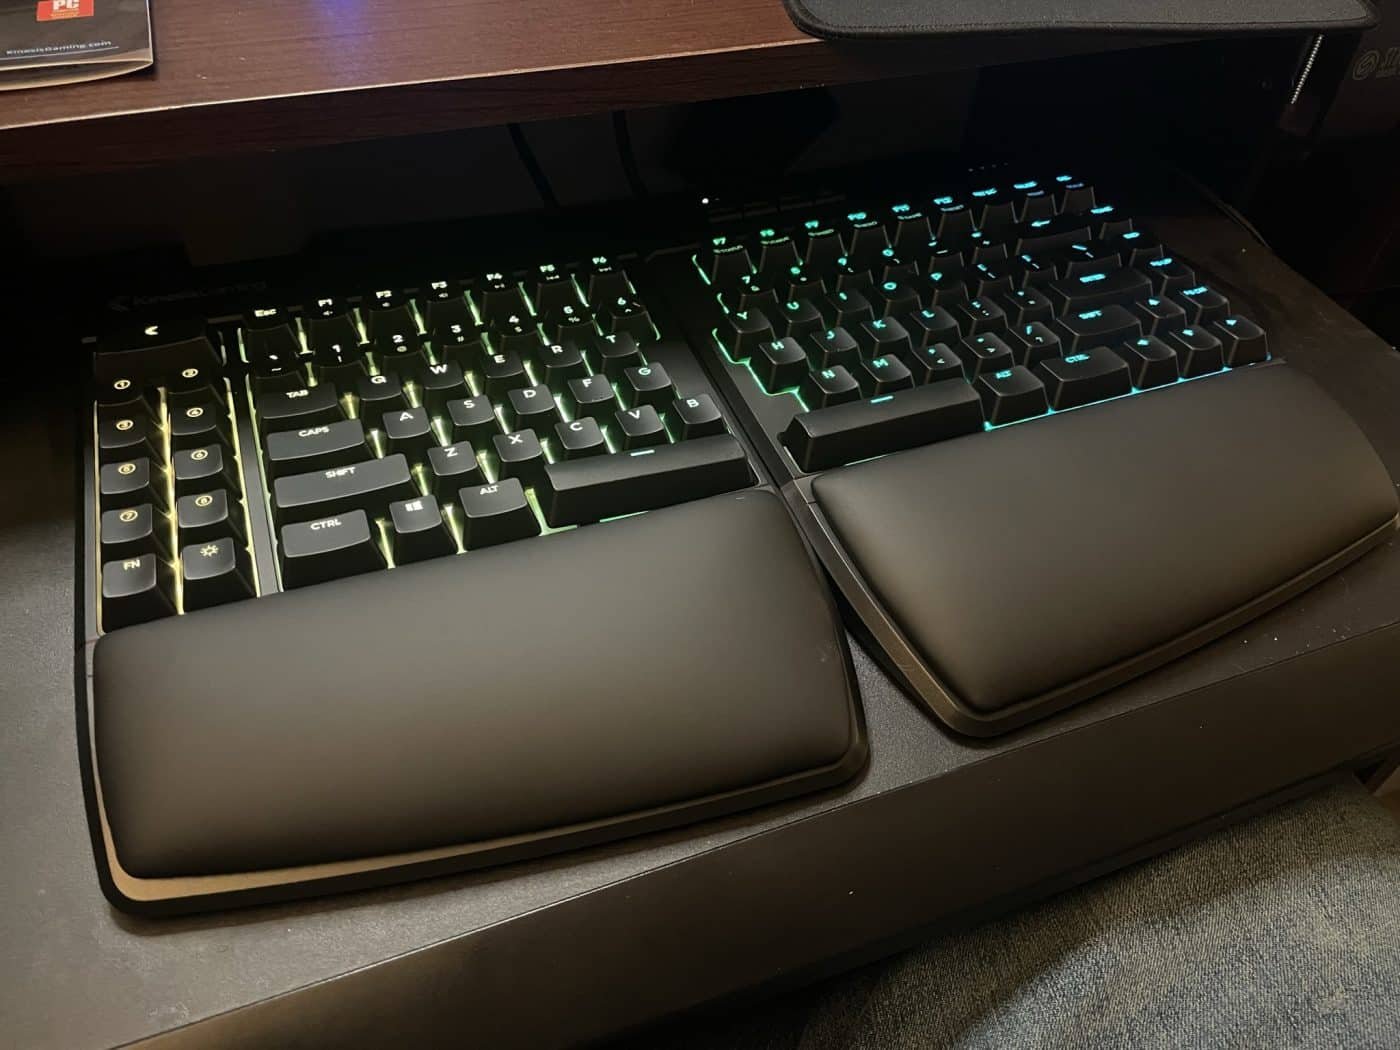 The kinesis freestyle edge rgb with glowing backlights.